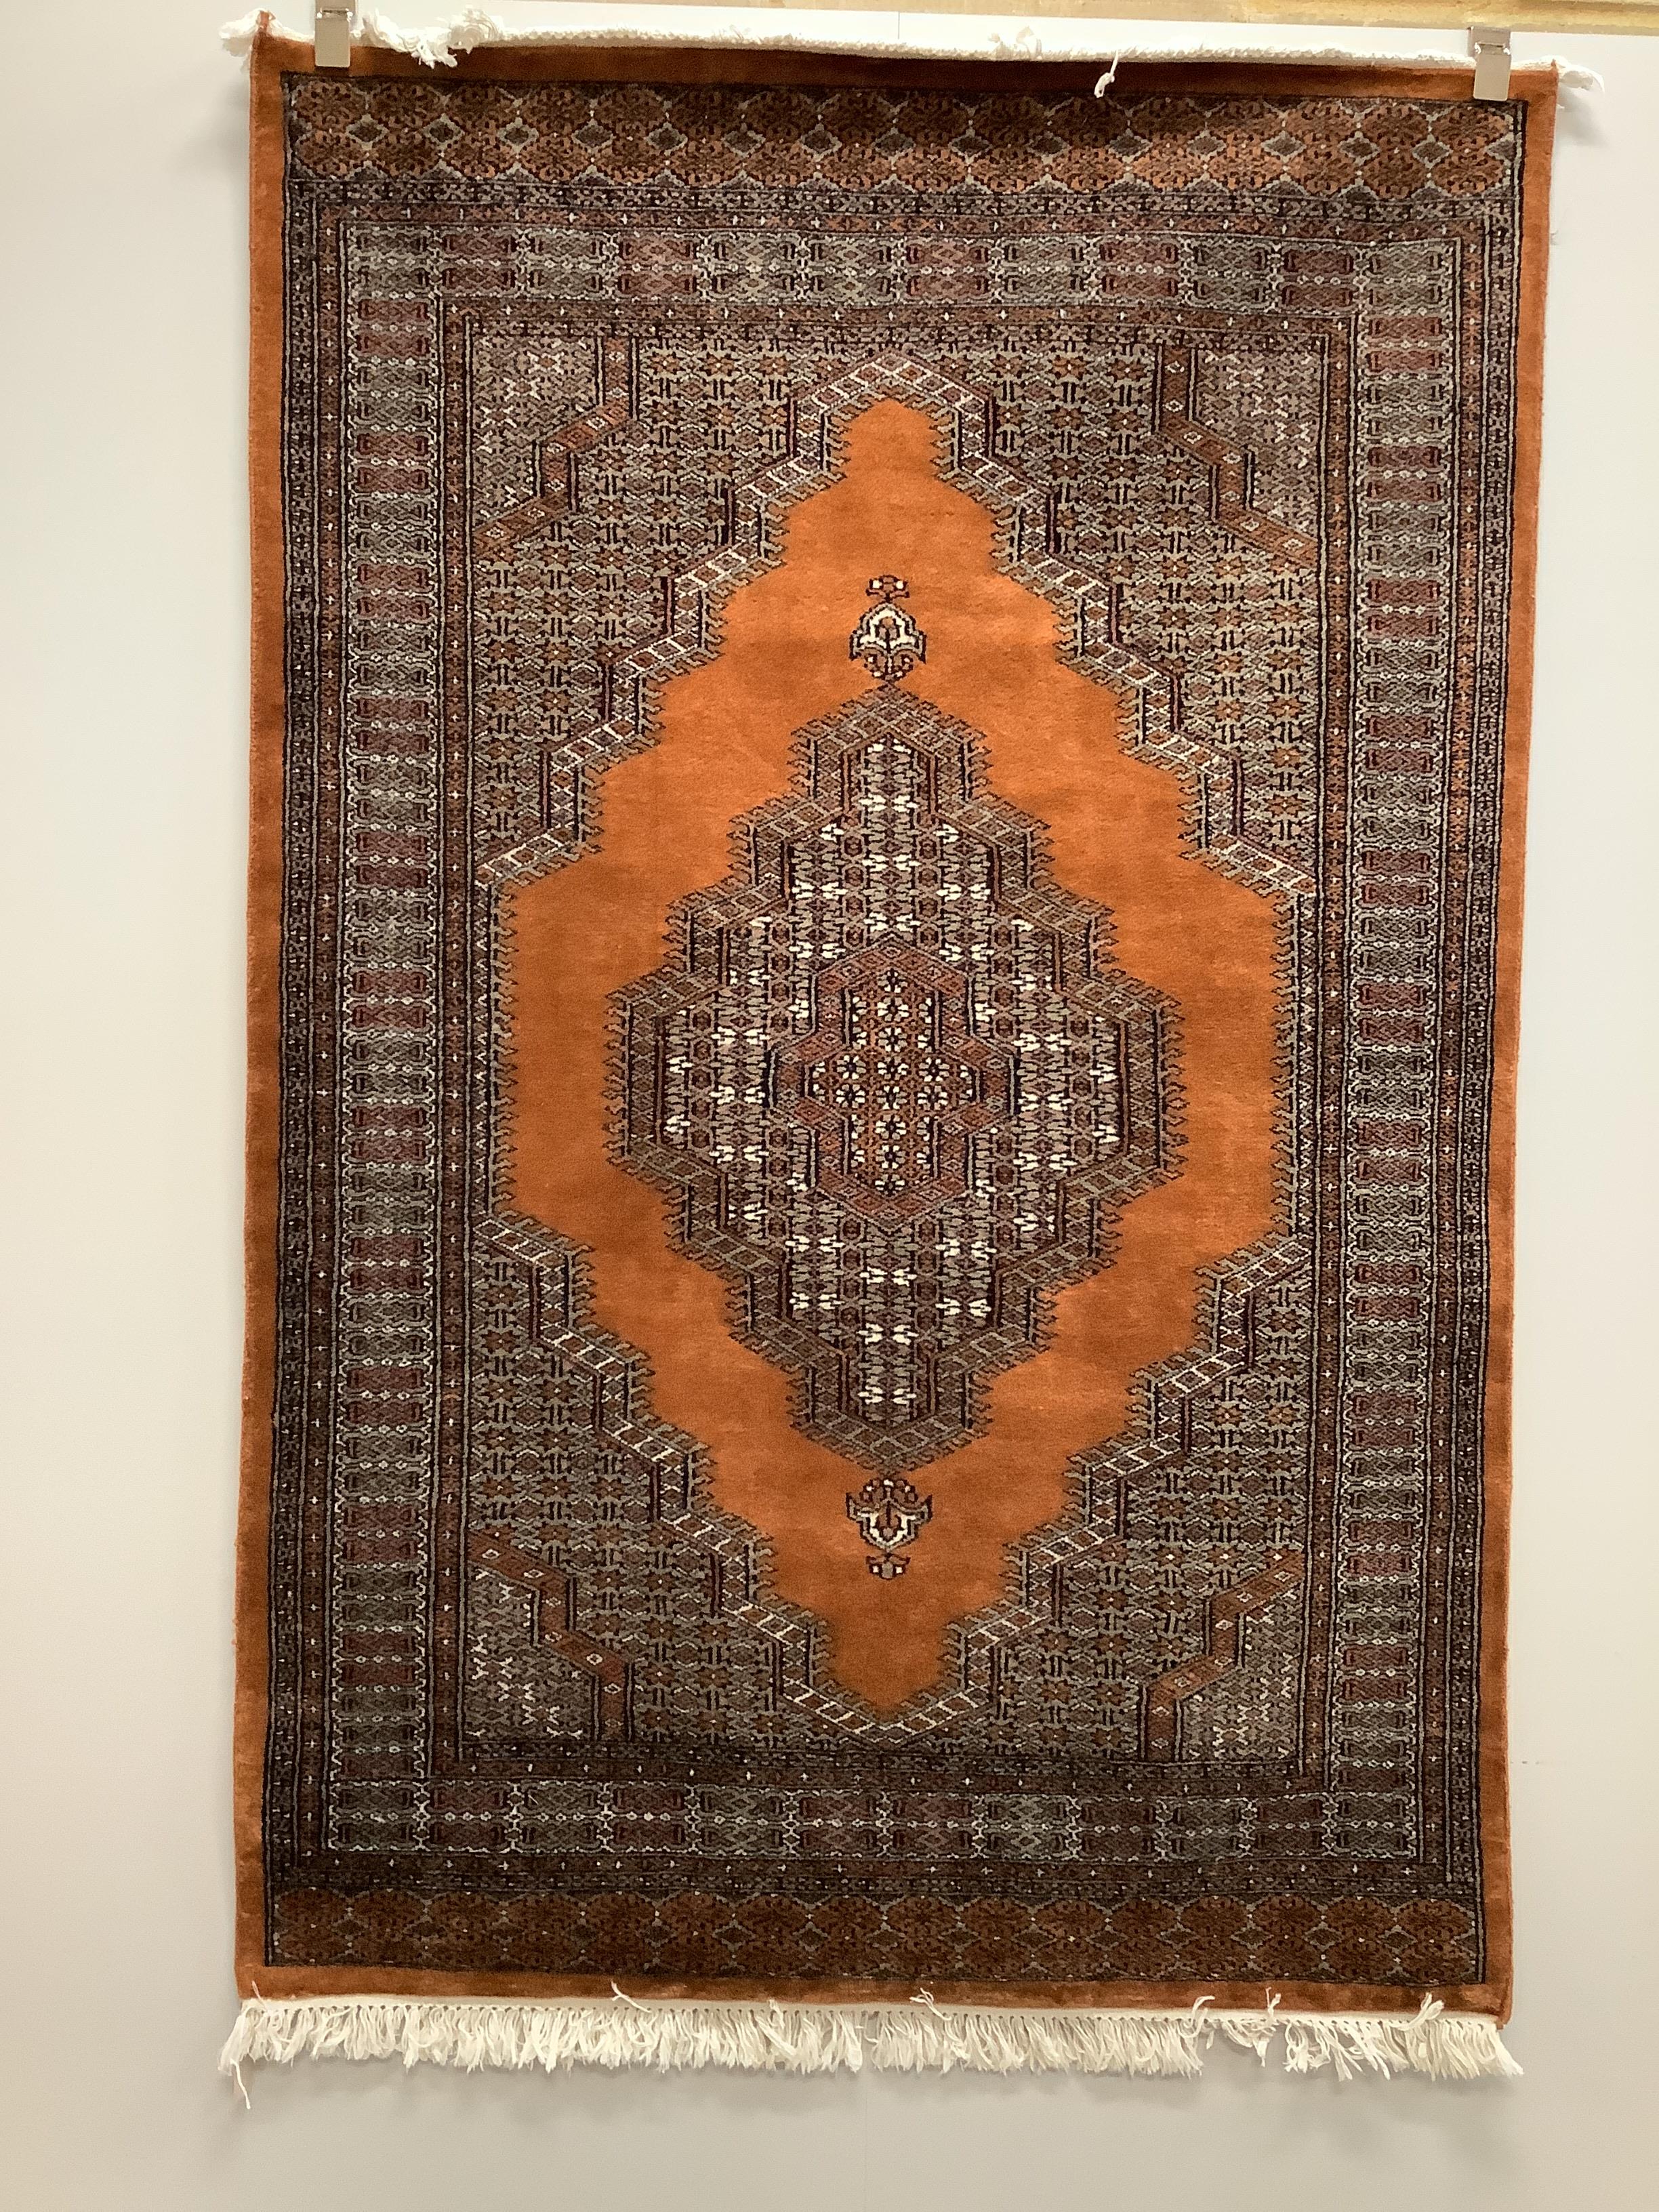 A Bokhara red ground rug and an Afghan rug, larger 184 x 120cm